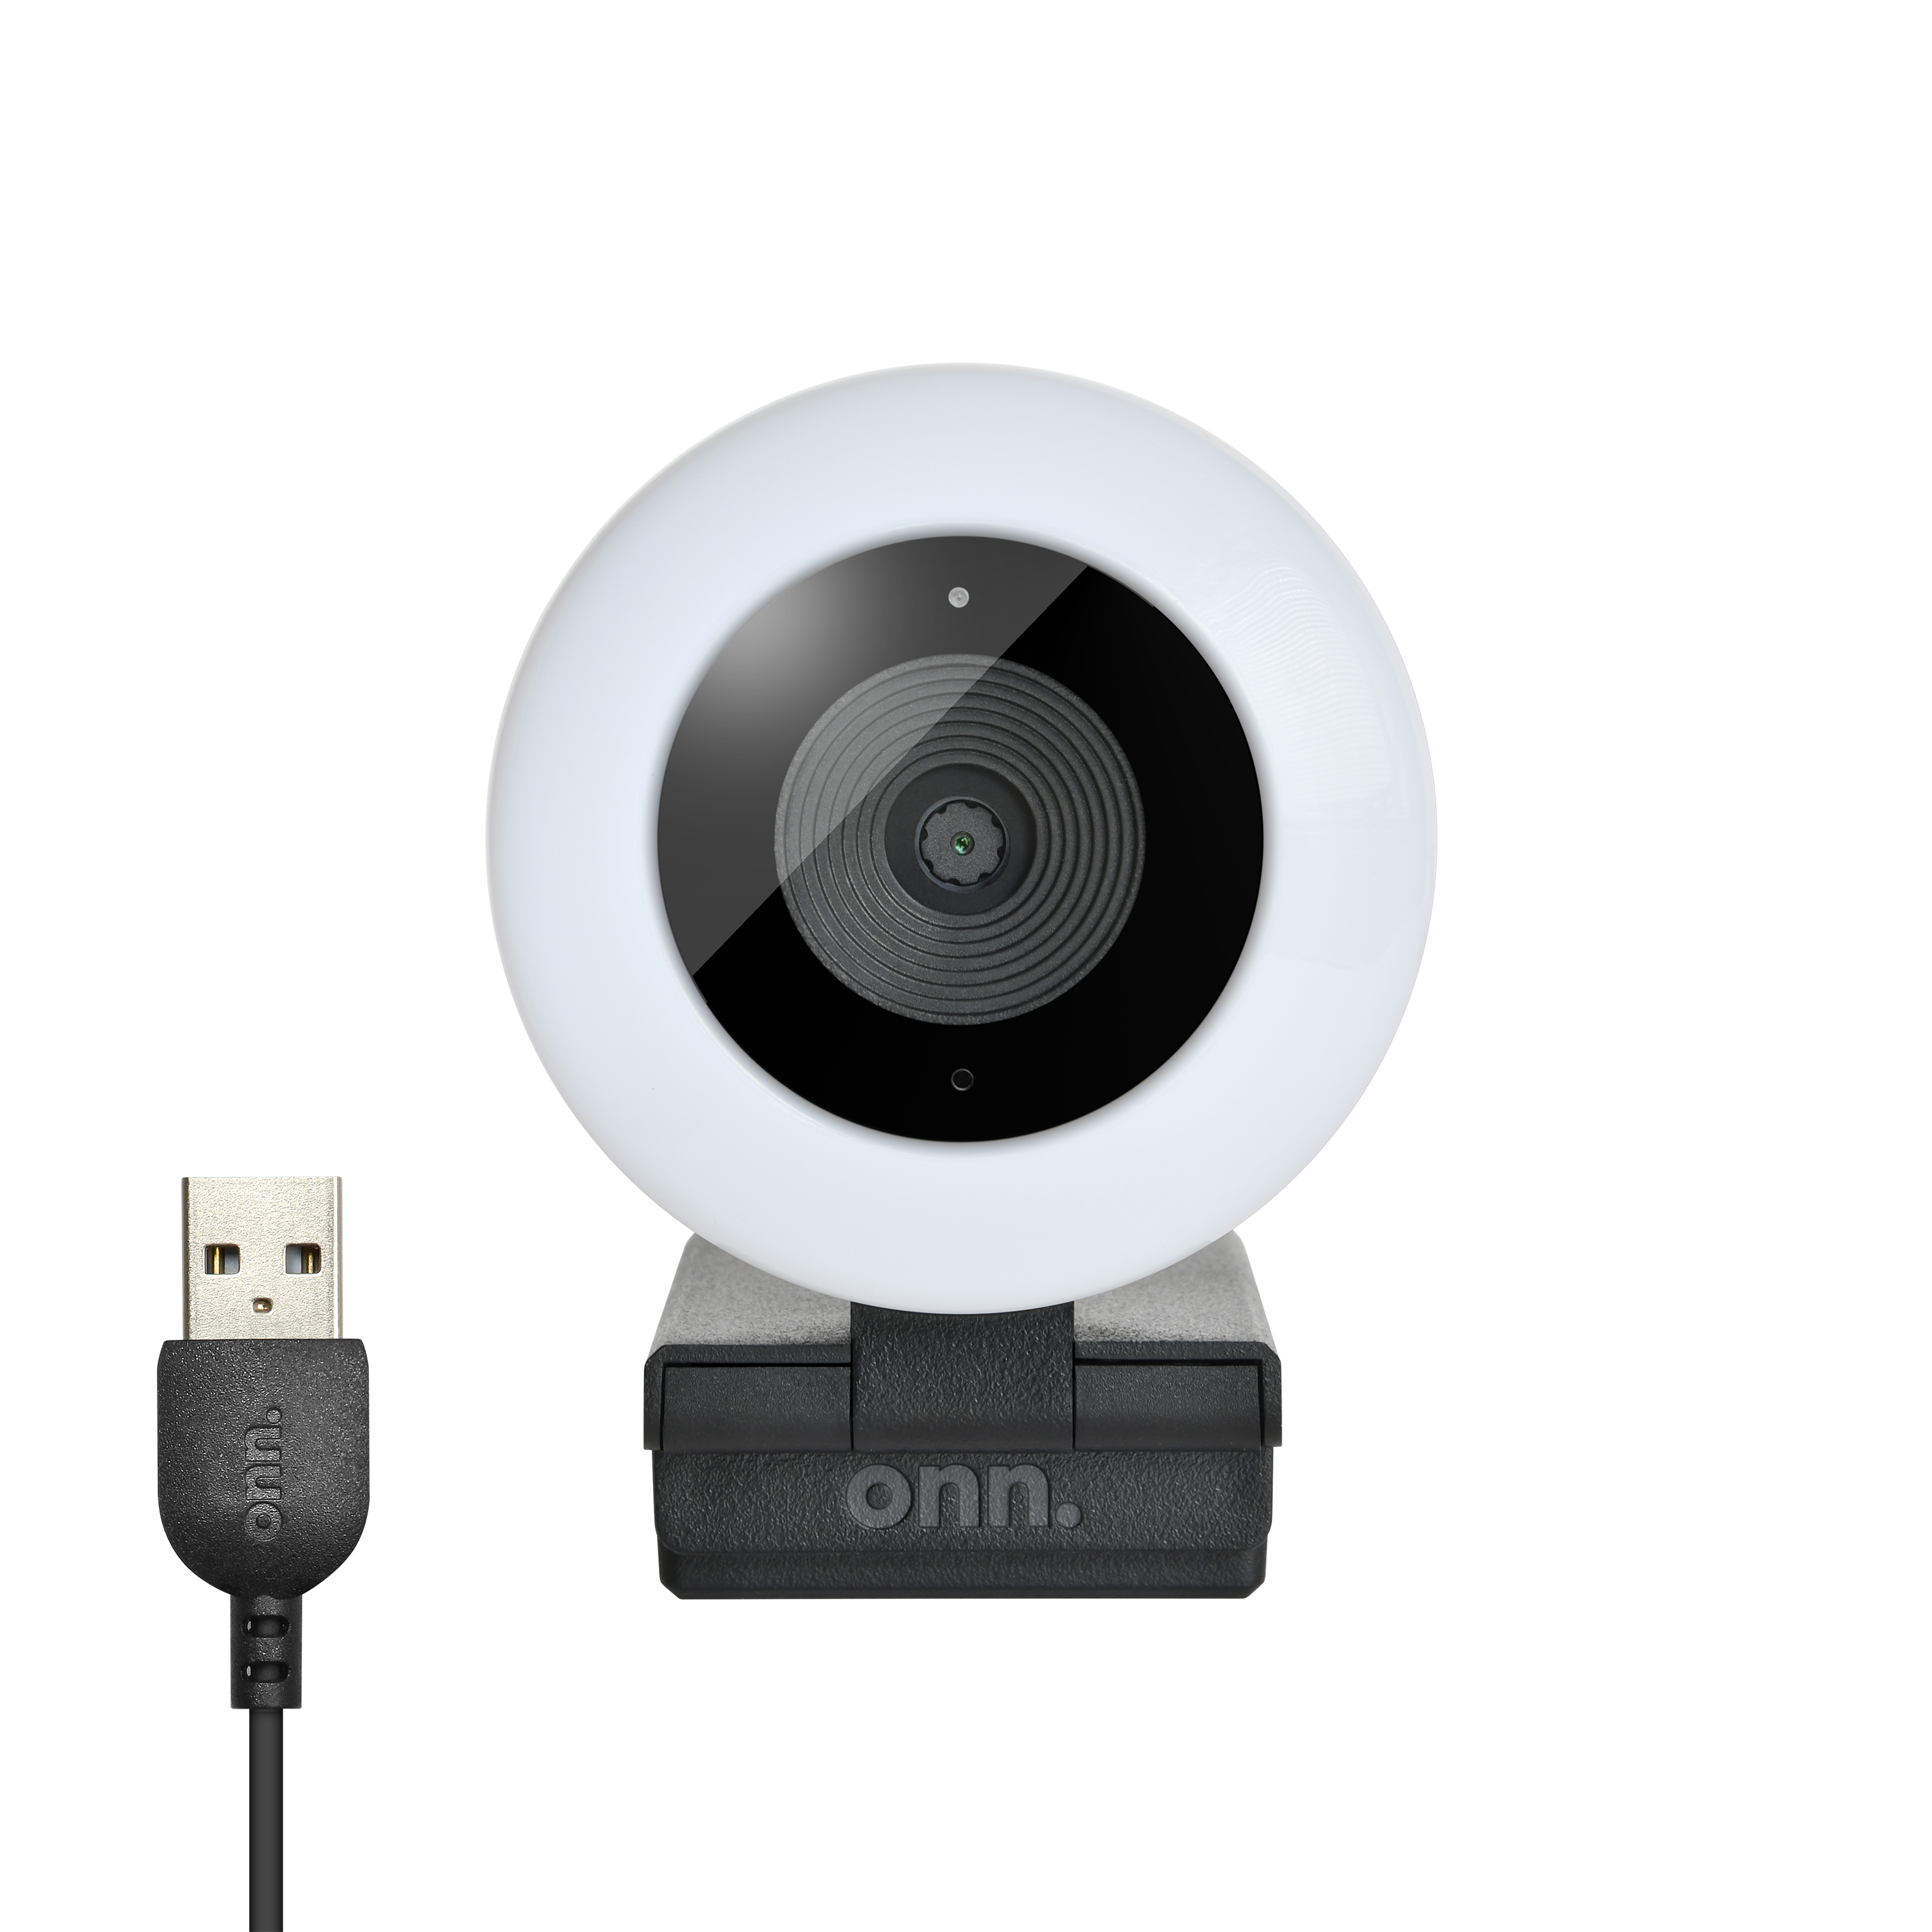 onn. Webcam with Ring Light w/3 LED Levels, Autofocus, Built-in Microphone, White & Black - image 1 of 7